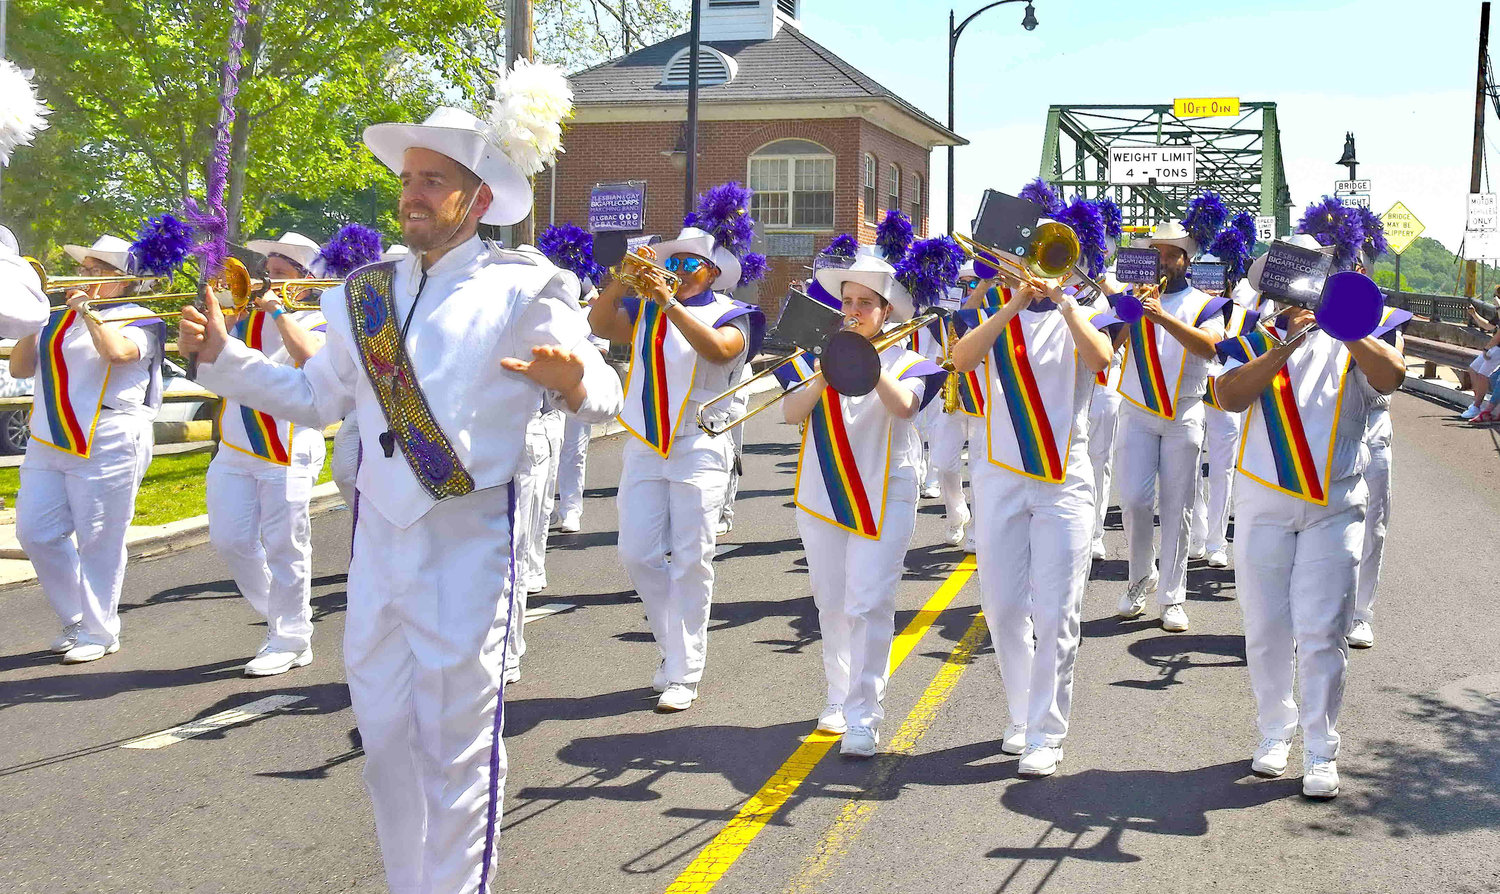 Members of New York City’s Lesbian and Gay Big Apple Corps Marching Band participate in the parade.